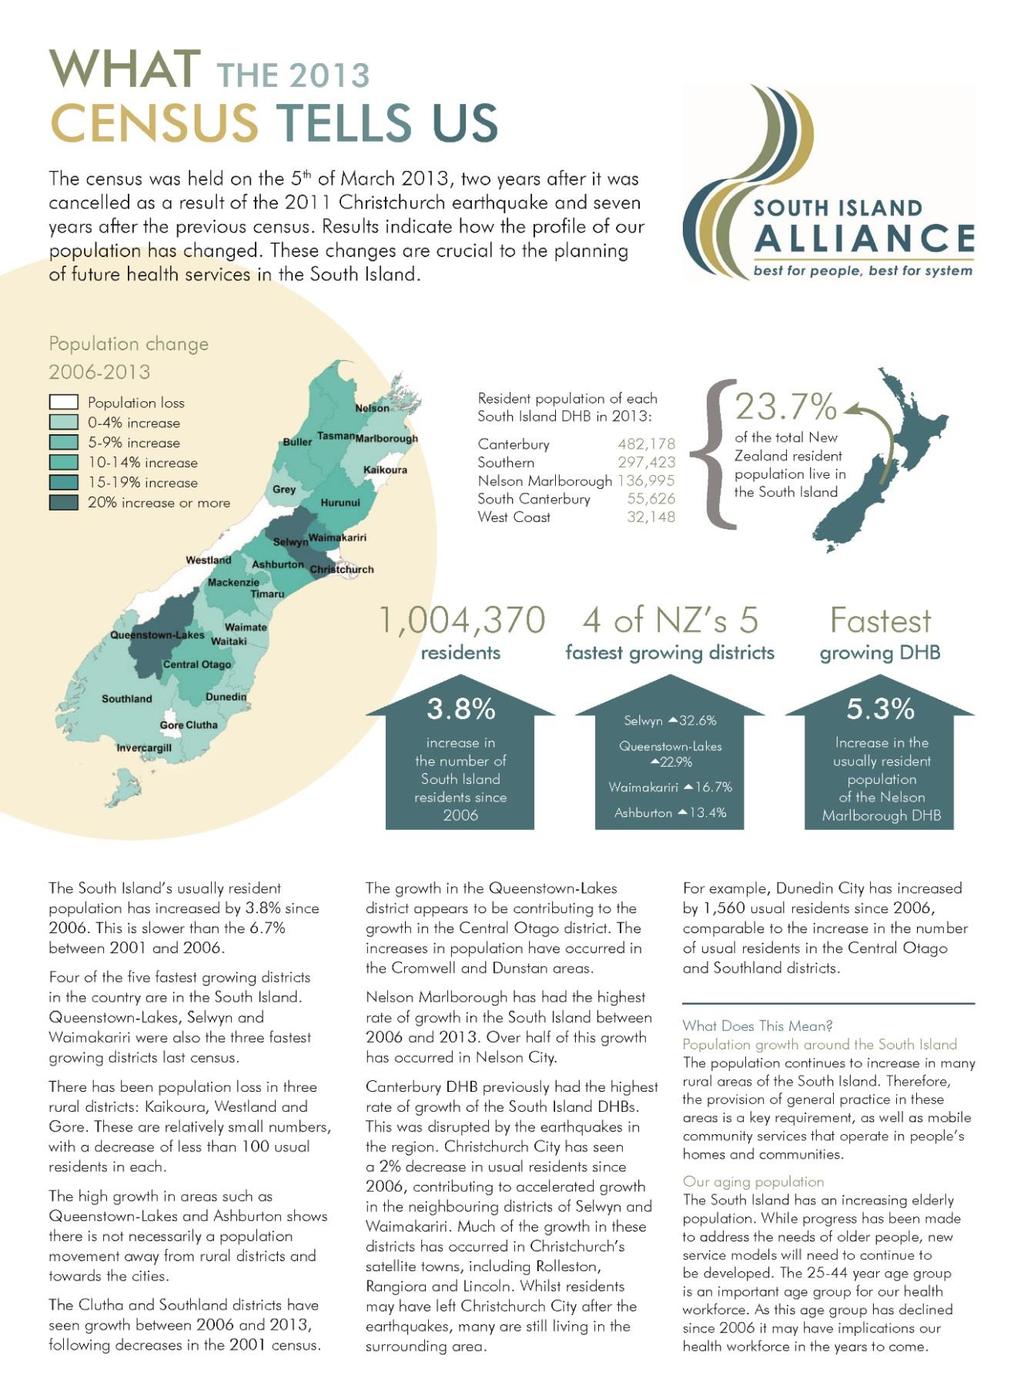 Drivers of service change DRIVERS OF HEALTH SERVICE CHANGE IN THE SOUTH ISLAND 3.